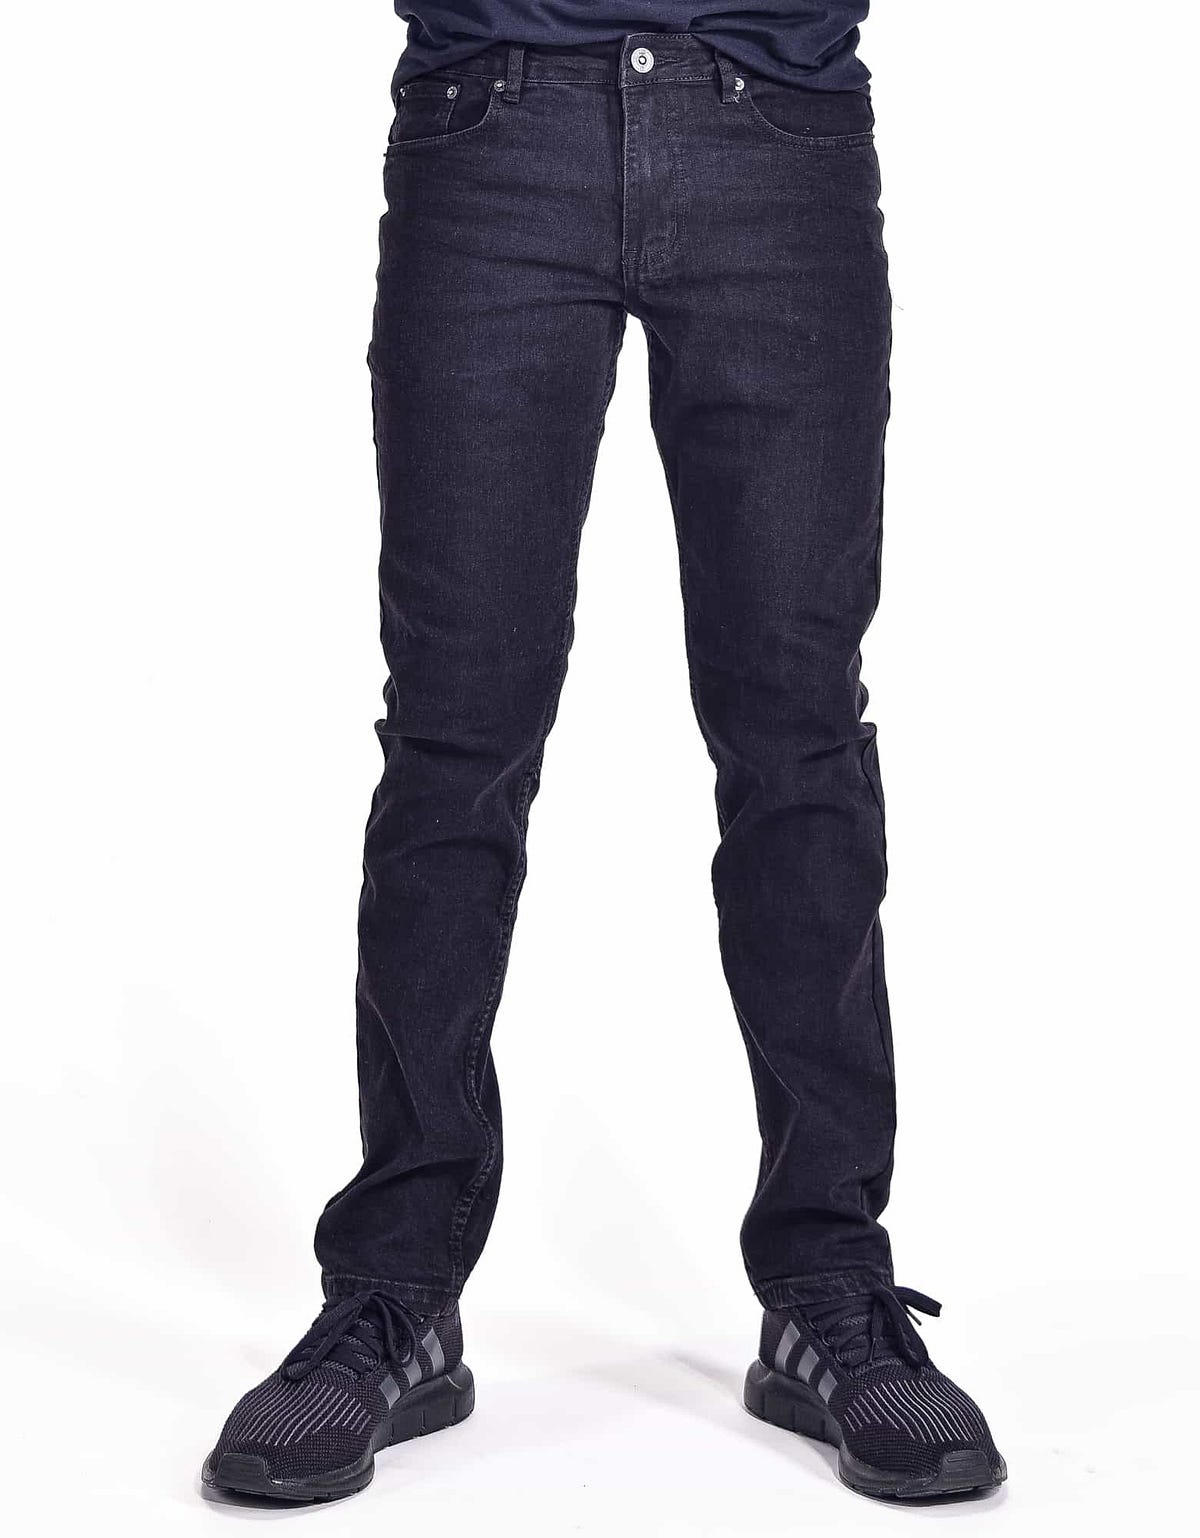 Black Cargo Men Pants. Discover the perfect blend of style and… | by ...